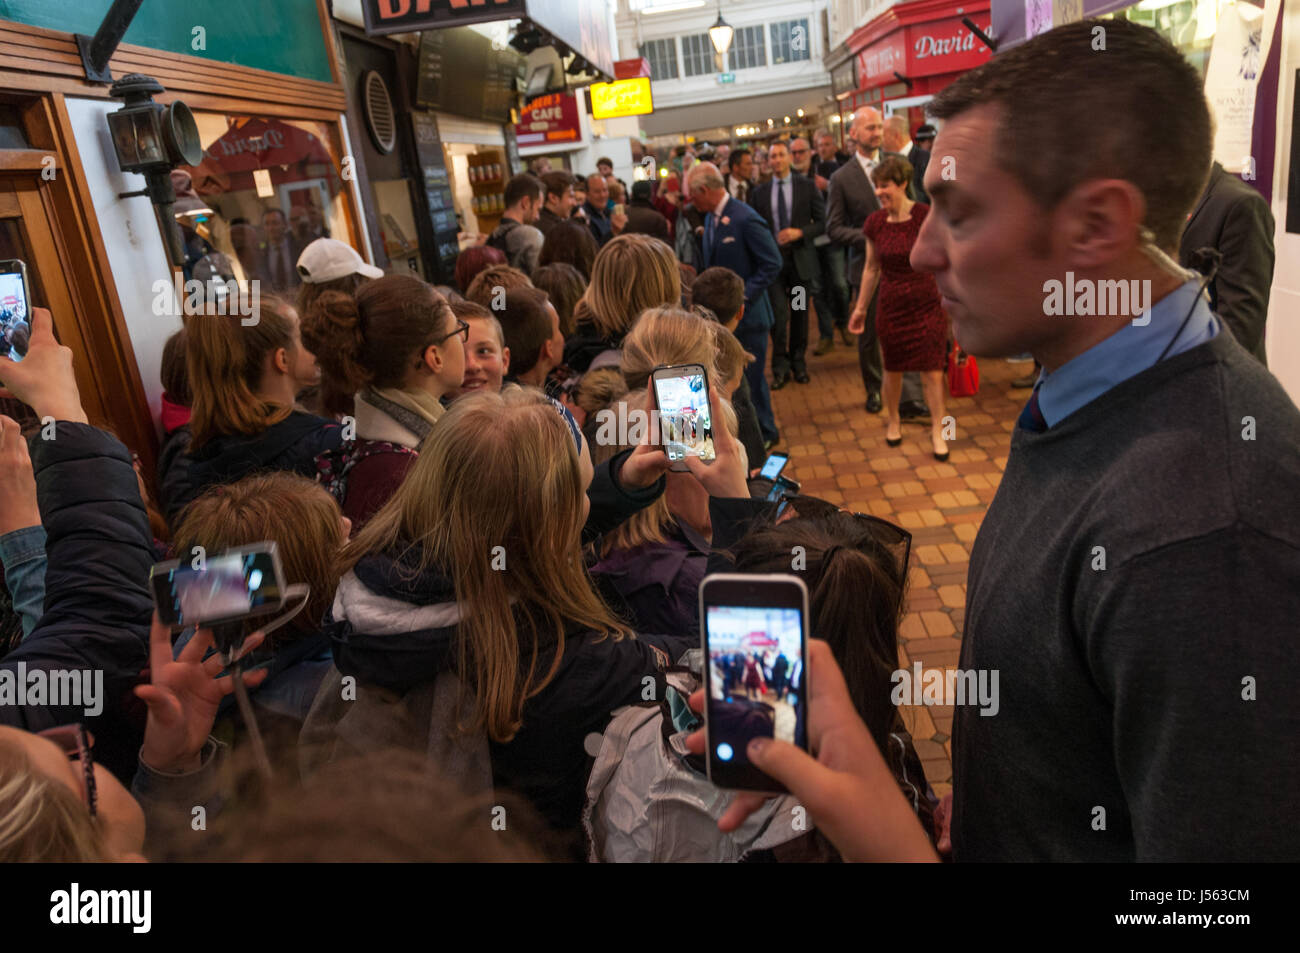 Oxford, Oxfordshire, UK. 16th May 2017, Prince Charles and Camilla visiting the Covered Market in Oxford Credit: Stanislav Halcin/Alamy Live News Stock Photo